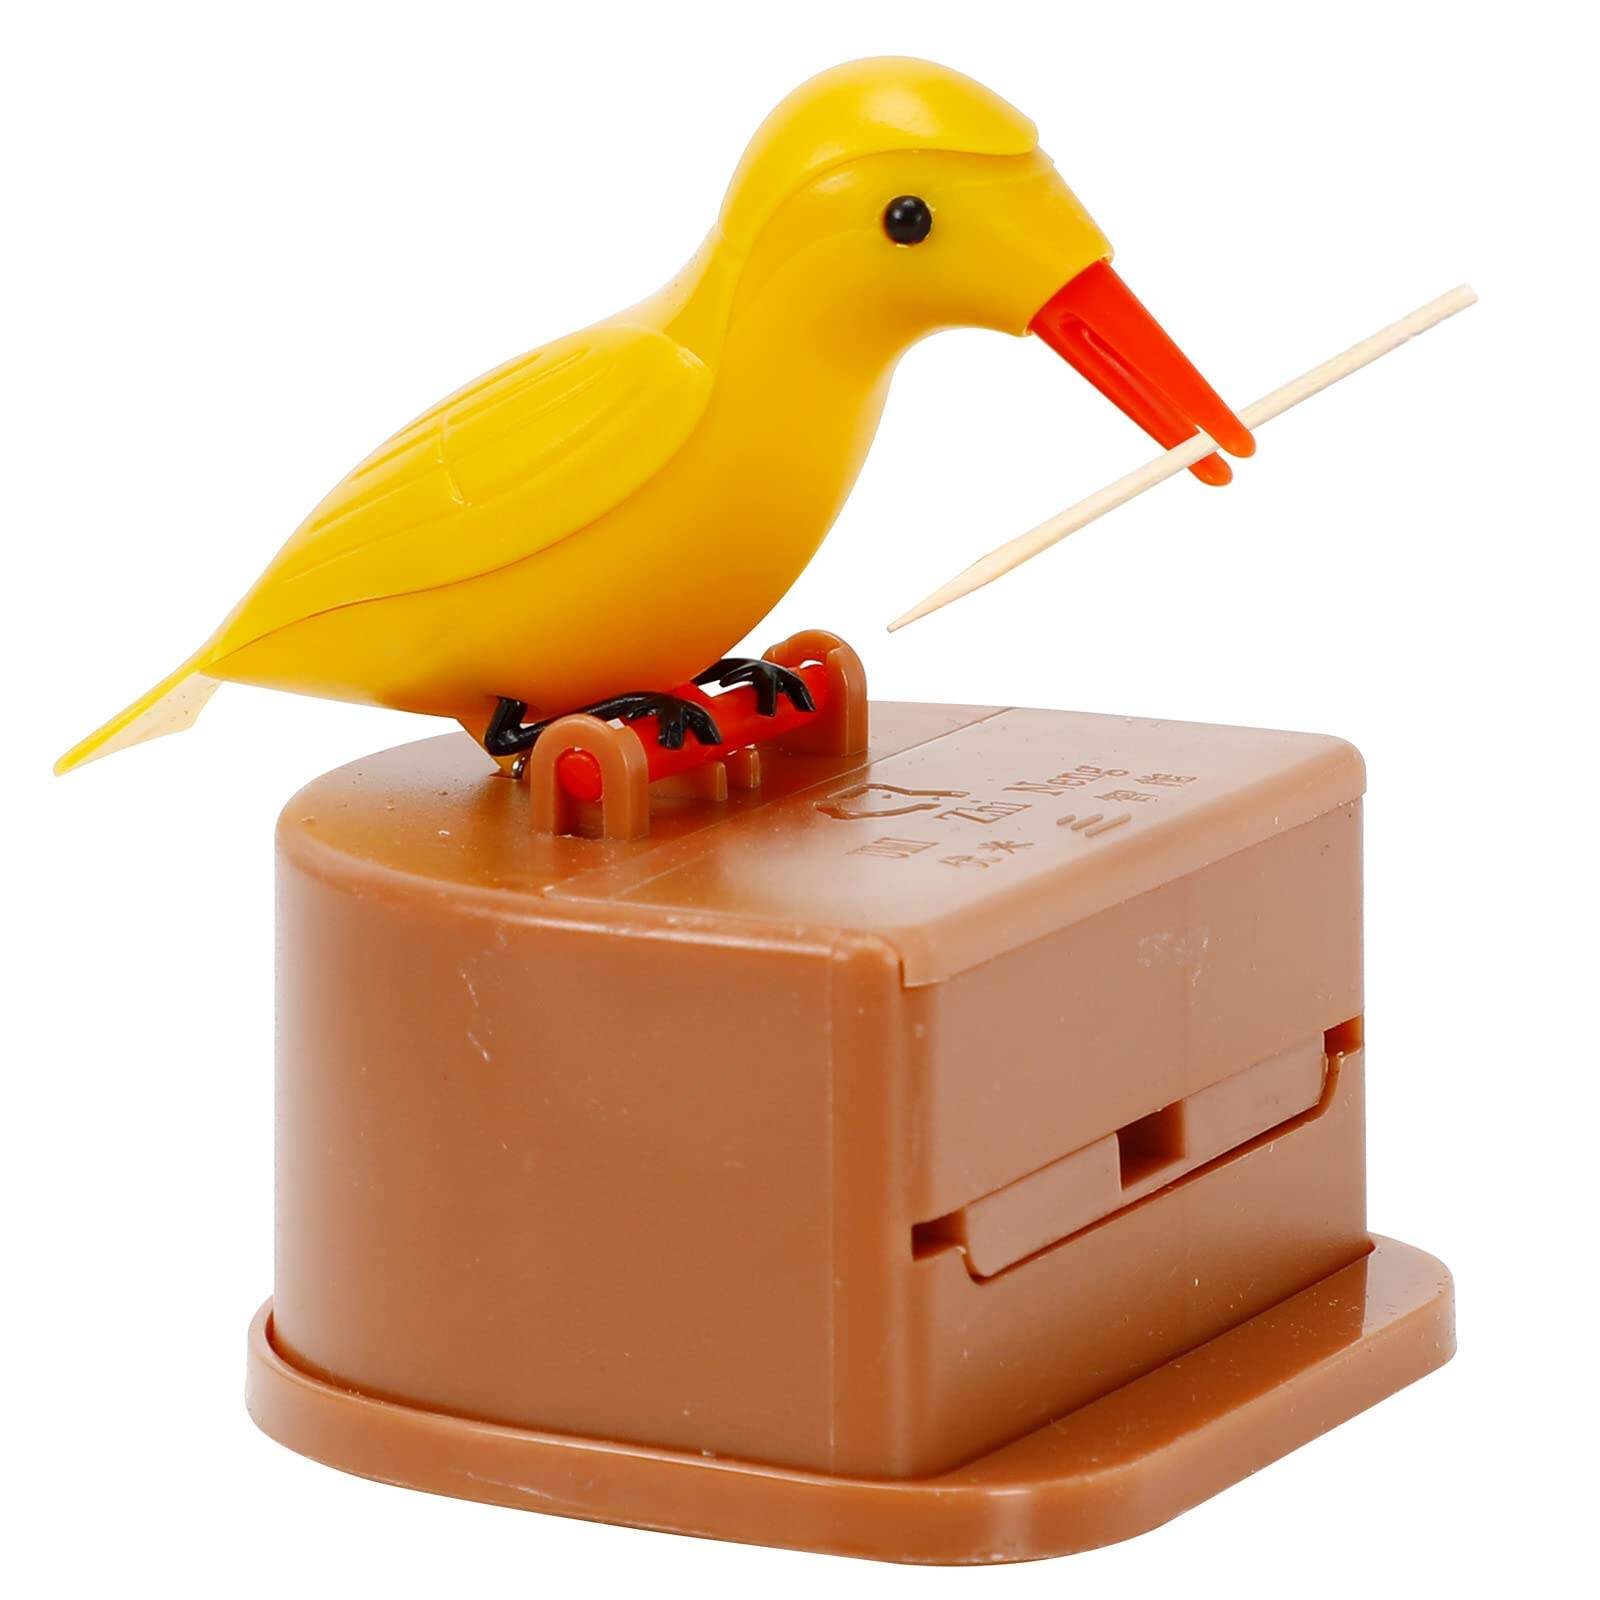 ?Last Day 48% Off - Woodpecker Toothpick Box(Contains 55 Toothpicks) - Buy 2 Get 1 Free